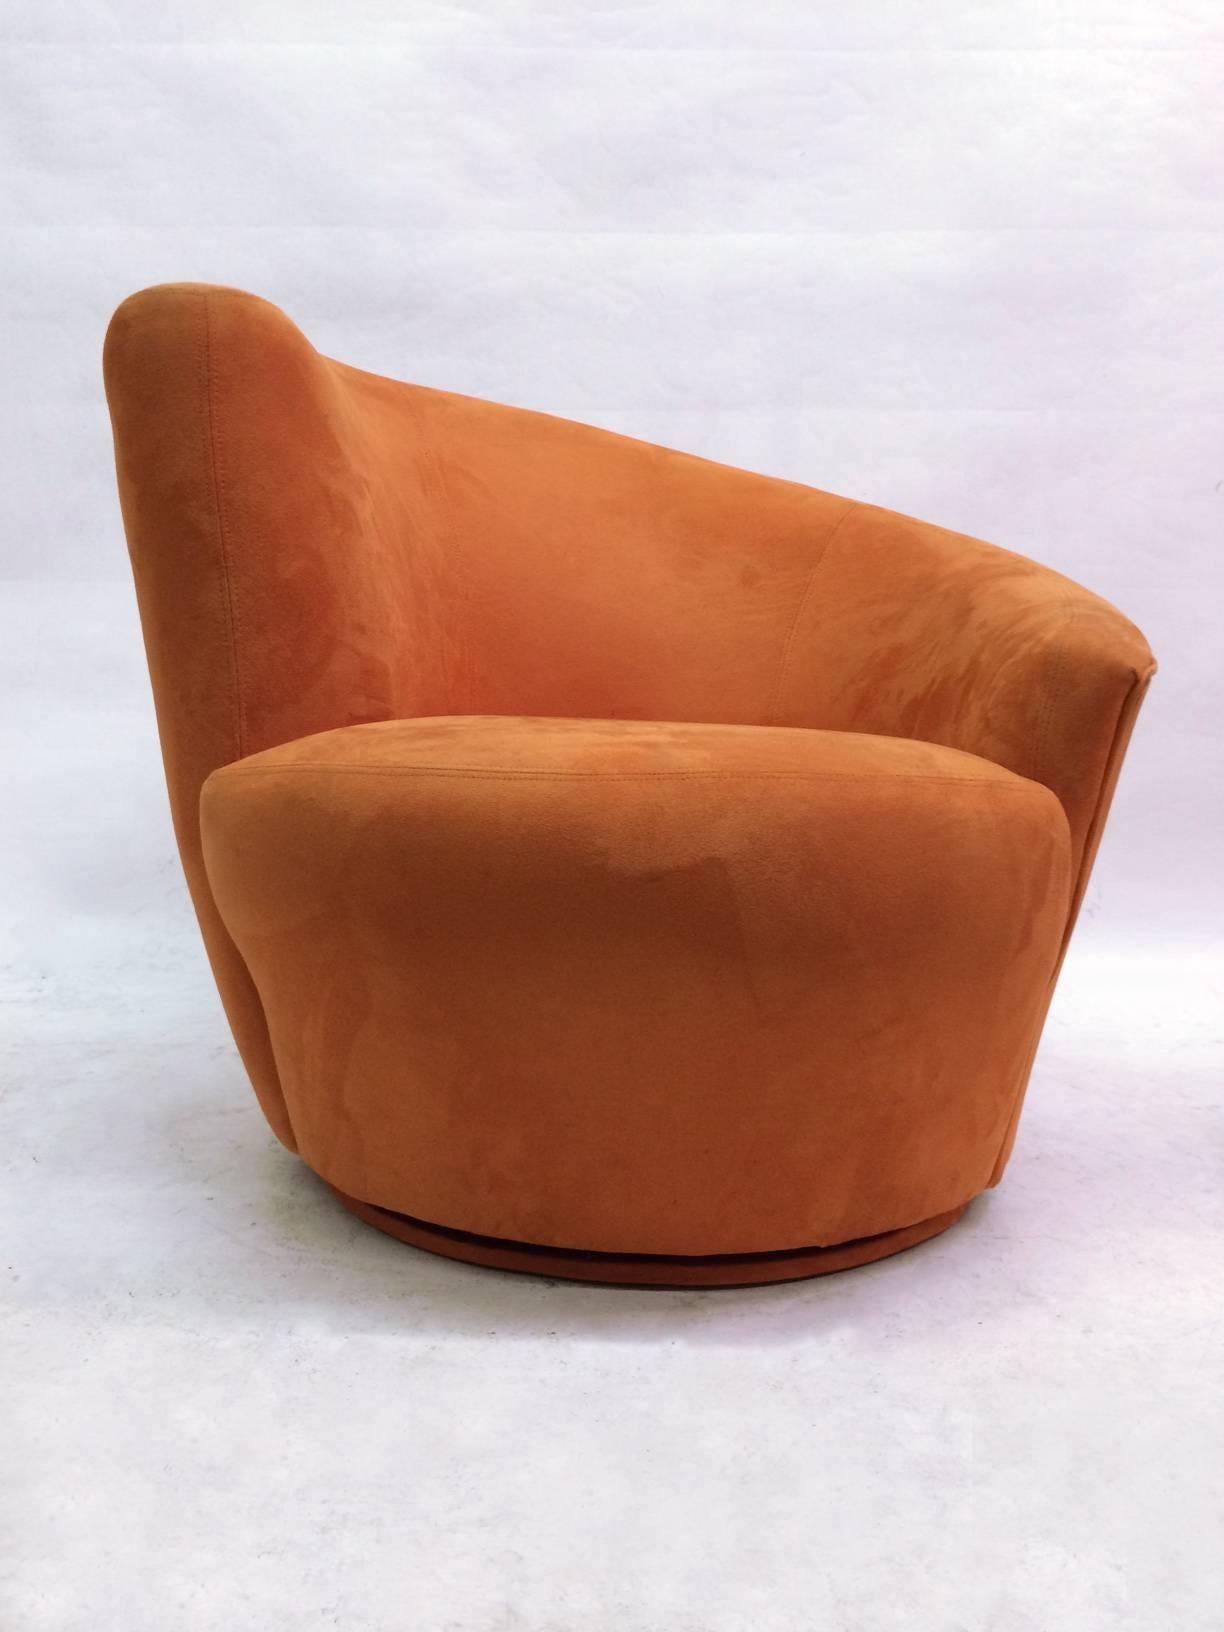 A pair of Classic Nautilus chairs designed by Vladimir Kagan for Directional featuring sloping, asymmetrical backrests. These lounge chairs rest upon swiveling bases which allow them to rotate 180 degrees and then return to their original